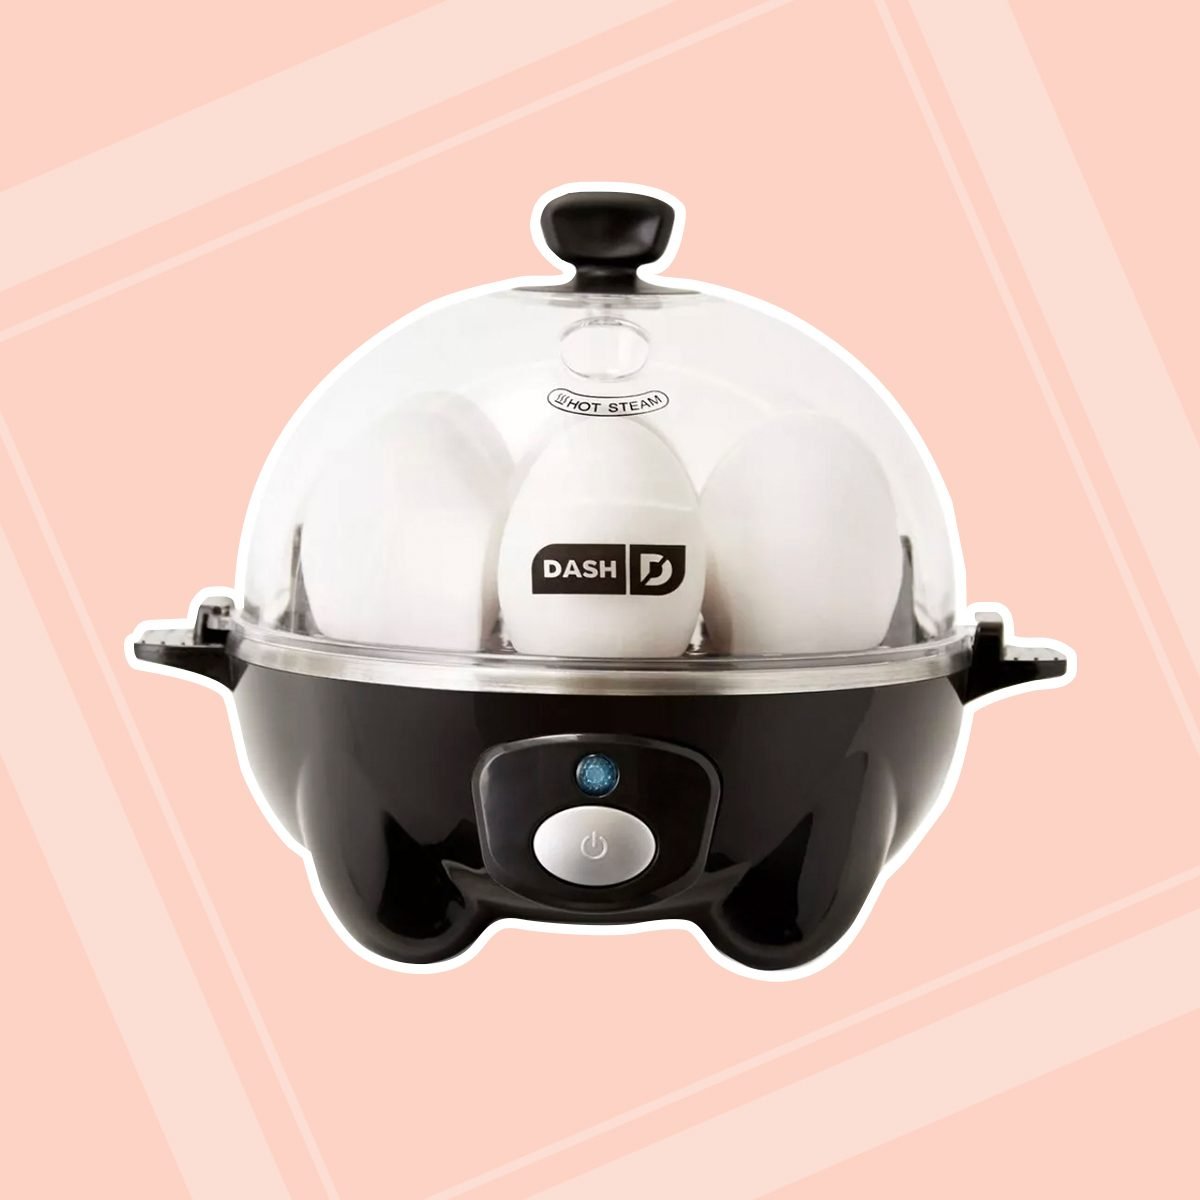 Egg Cooker with Built-In Timer, Poaching Tray, Stainless Steel Lid